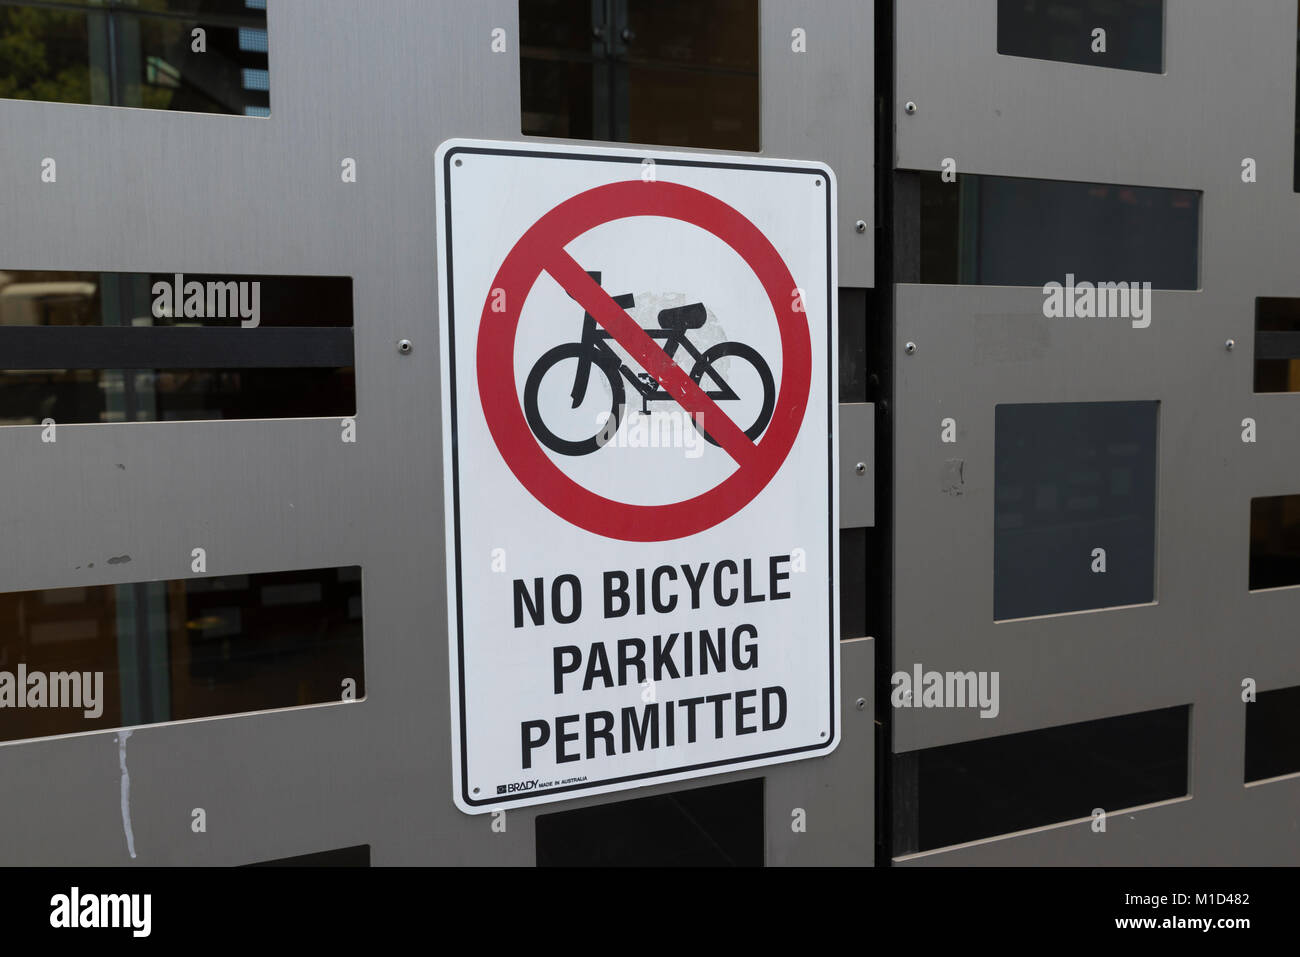 No Bicycle Parking permitted sign UTS Building 11,Sydney, Australia Stock Photo